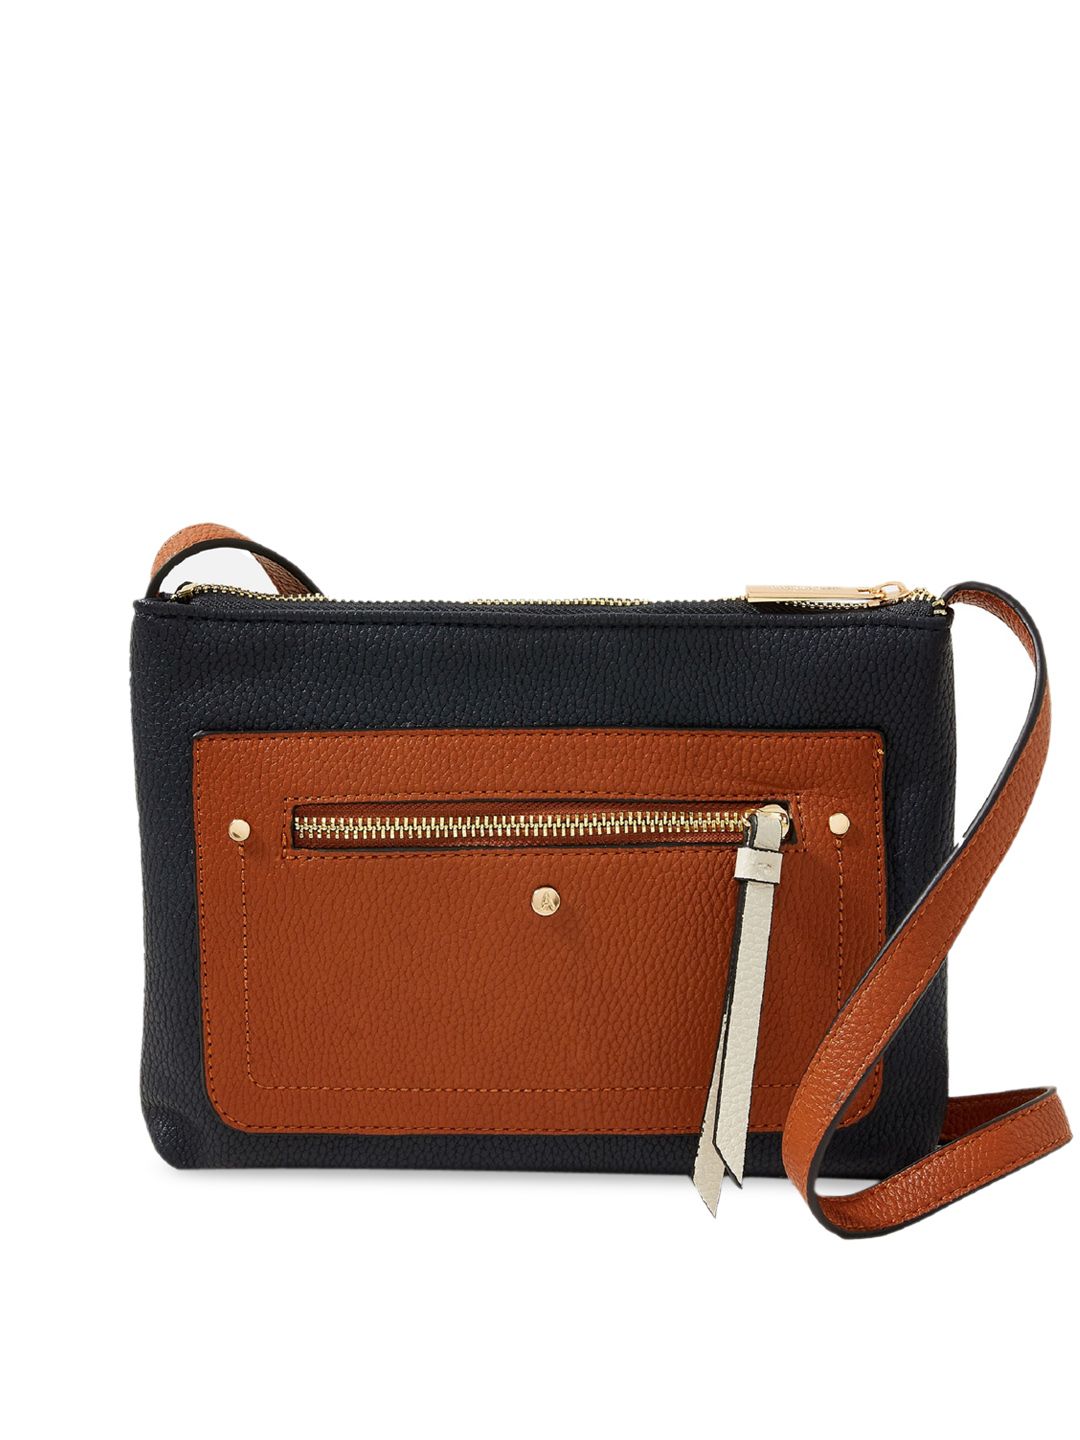 Accessorize Black & Brown Colourblocked Sling Bag Price in India